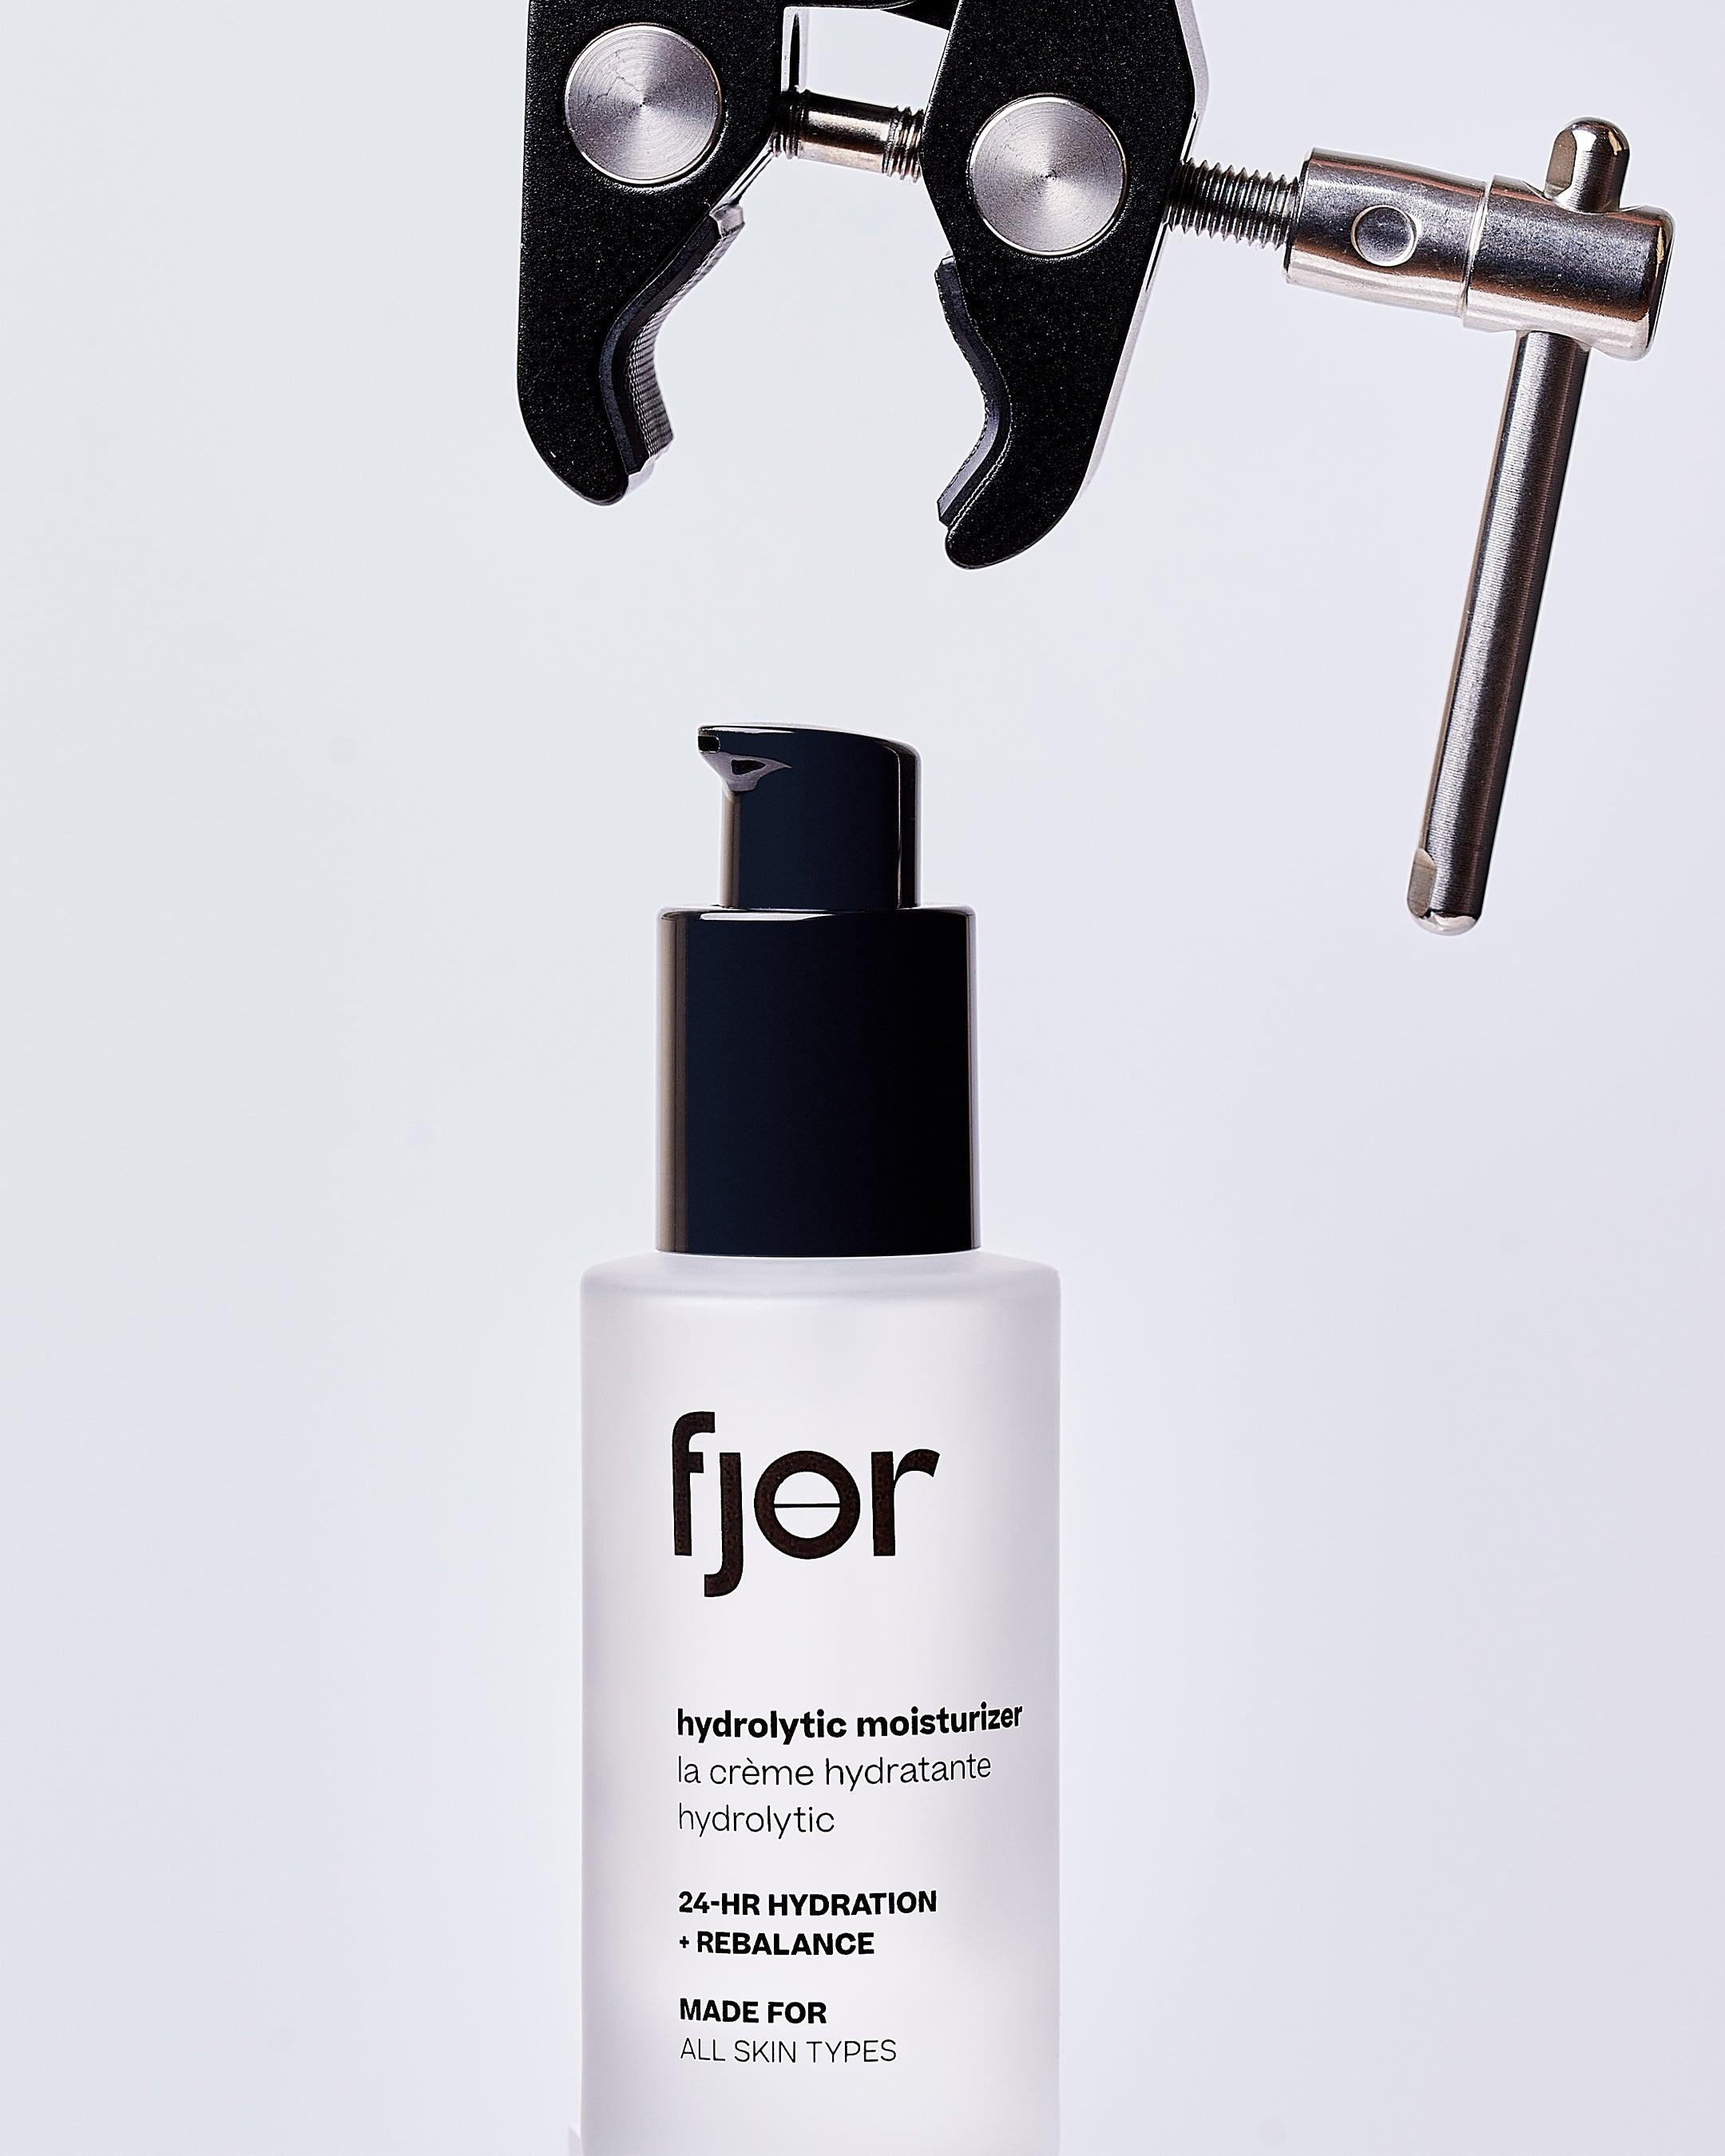 a bottle of the hydrolytic moisturizer with a scientific clamp suspended above